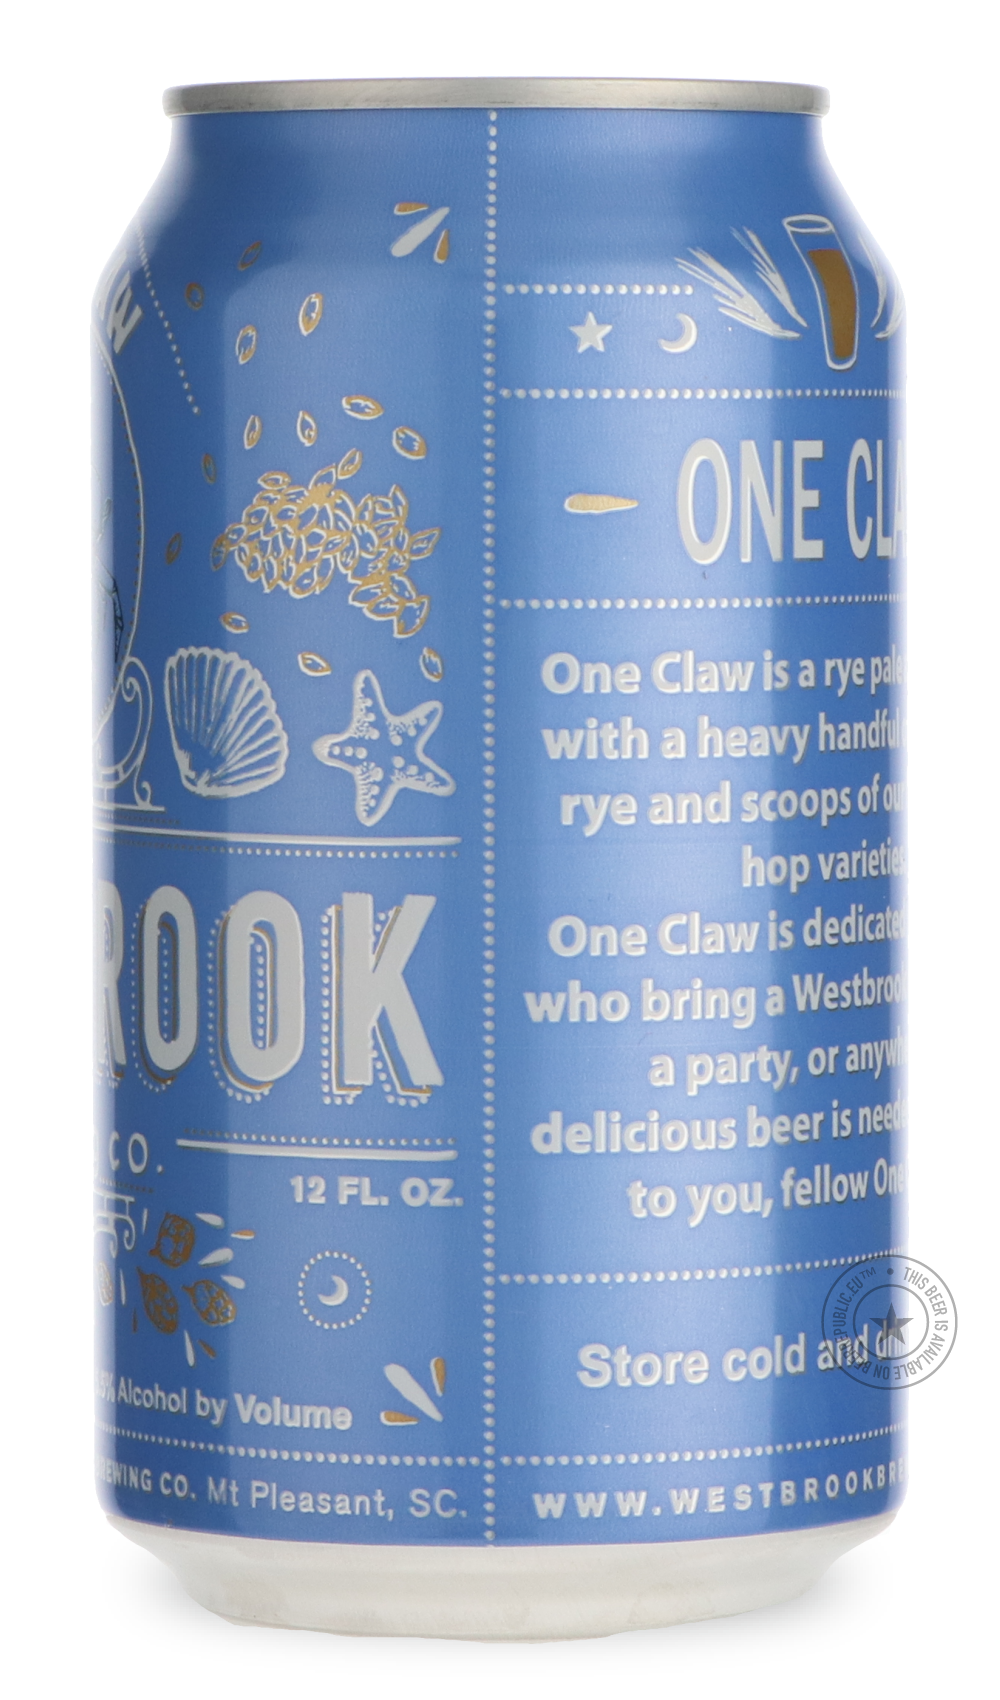 -Westbrook- One Claw-Pale- Only @ Beer Republic - The best online beer store for American & Canadian craft beer - Buy beer online from the USA and Canada - Bier online kopen - Amerikaans bier kopen - Craft beer store - Craft beer kopen - Amerikanisch bier kaufen - Bier online kaufen - Acheter biere online - IPA - Stout - Porter - New England IPA - Hazy IPA - Imperial Stout - Barrel Aged - Barrel Aged Imperial Stout - Brown - Dark beer - Blond - Blonde - Pilsner - Lager - Wheat - Weizen - Amber - Barley Wine